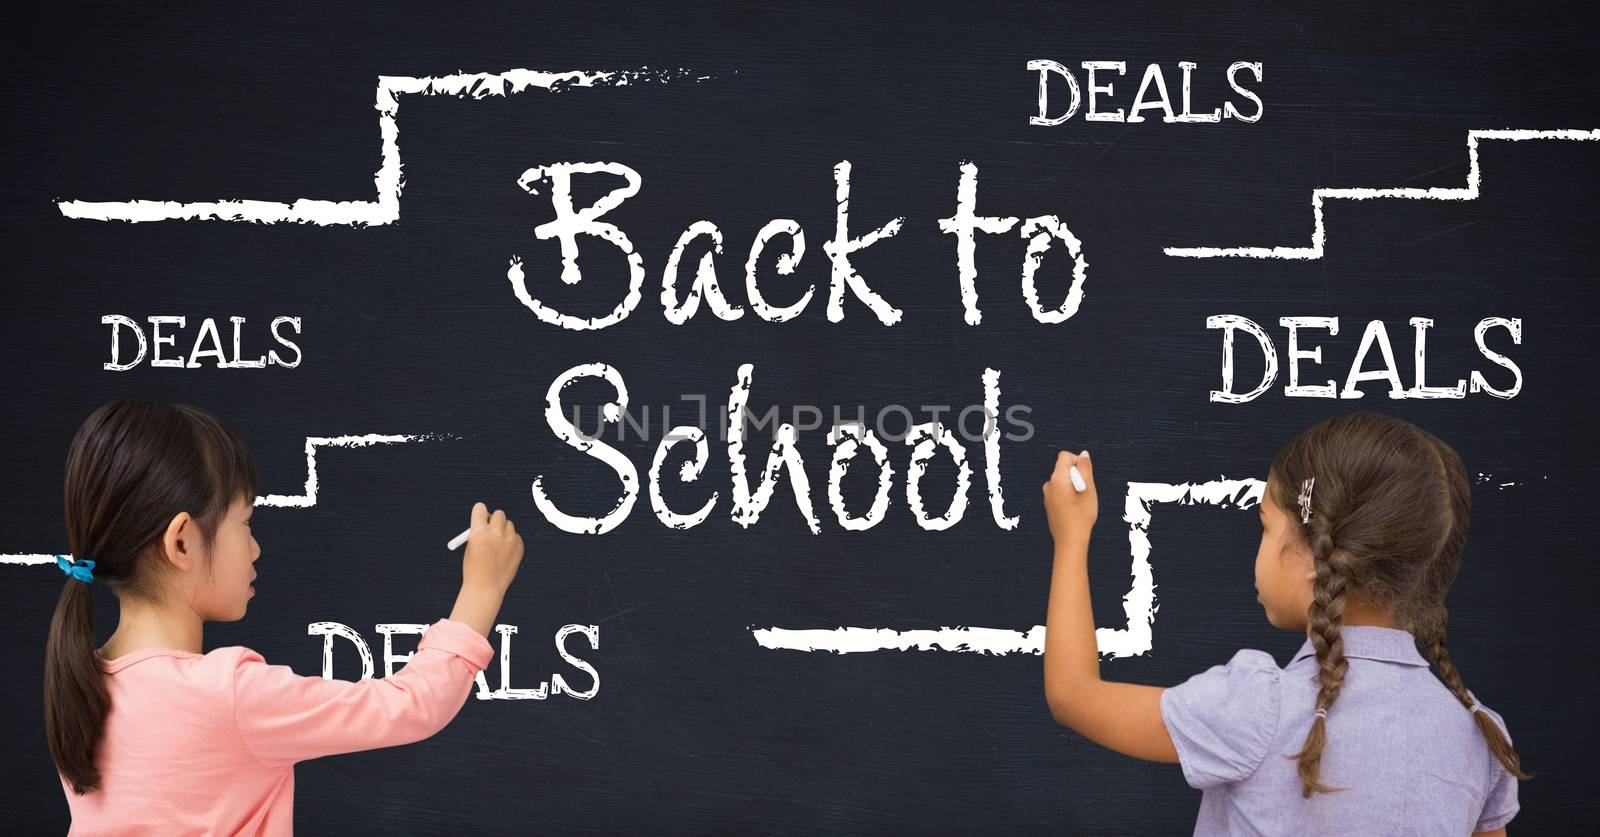 Digital composite of Girls writing Back to school deals with education drawings on blackboard with chalk